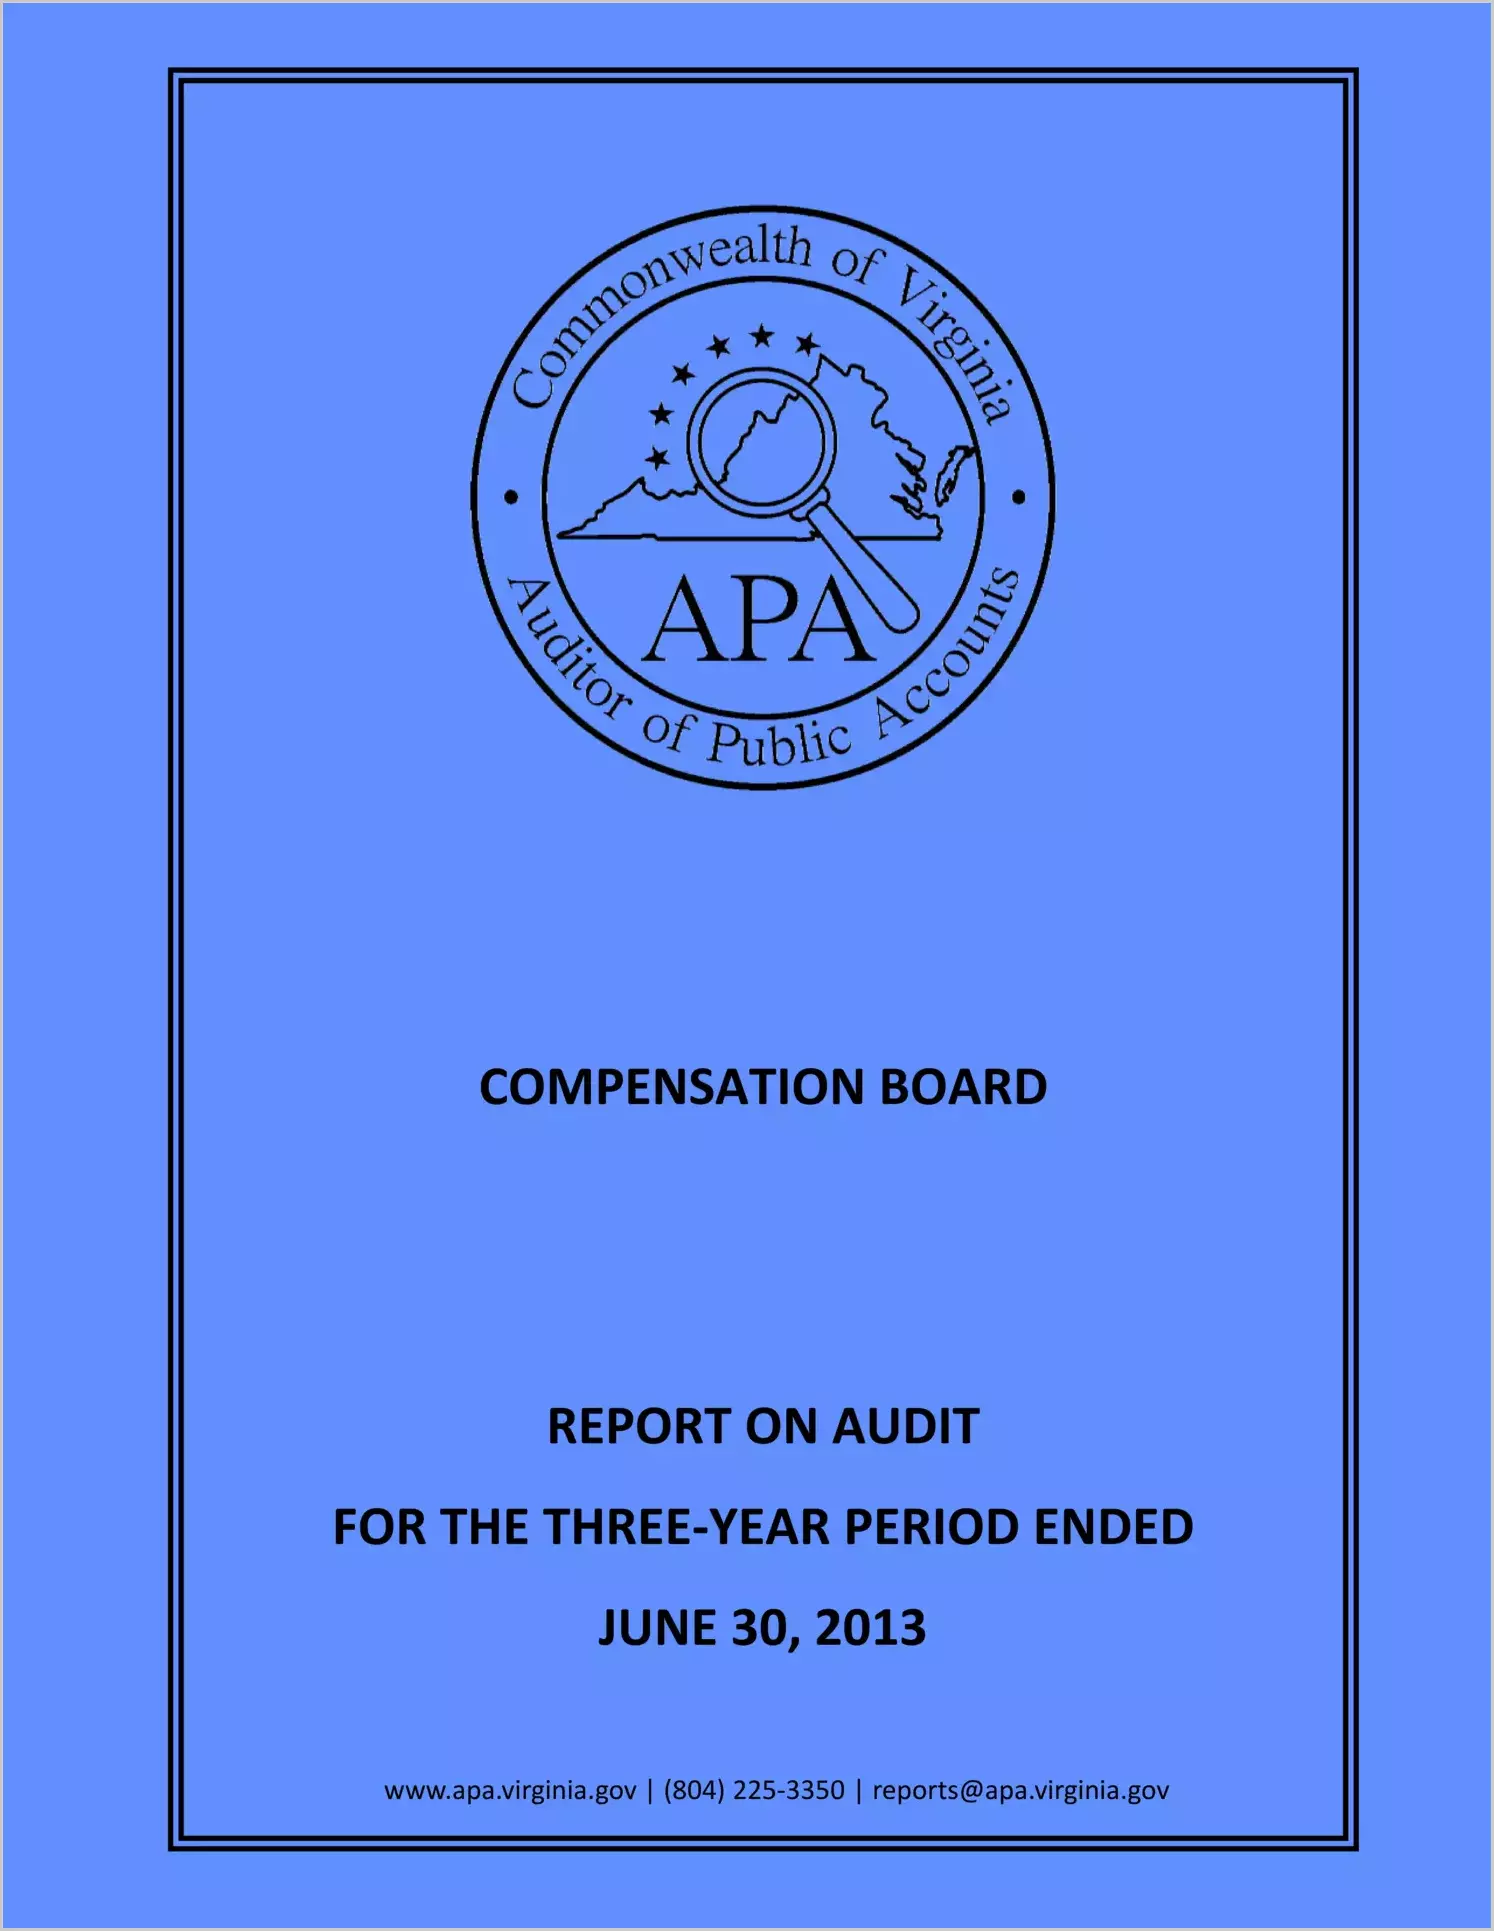 Compensation Board Report on Audit for the three year period ended June 30, 2013